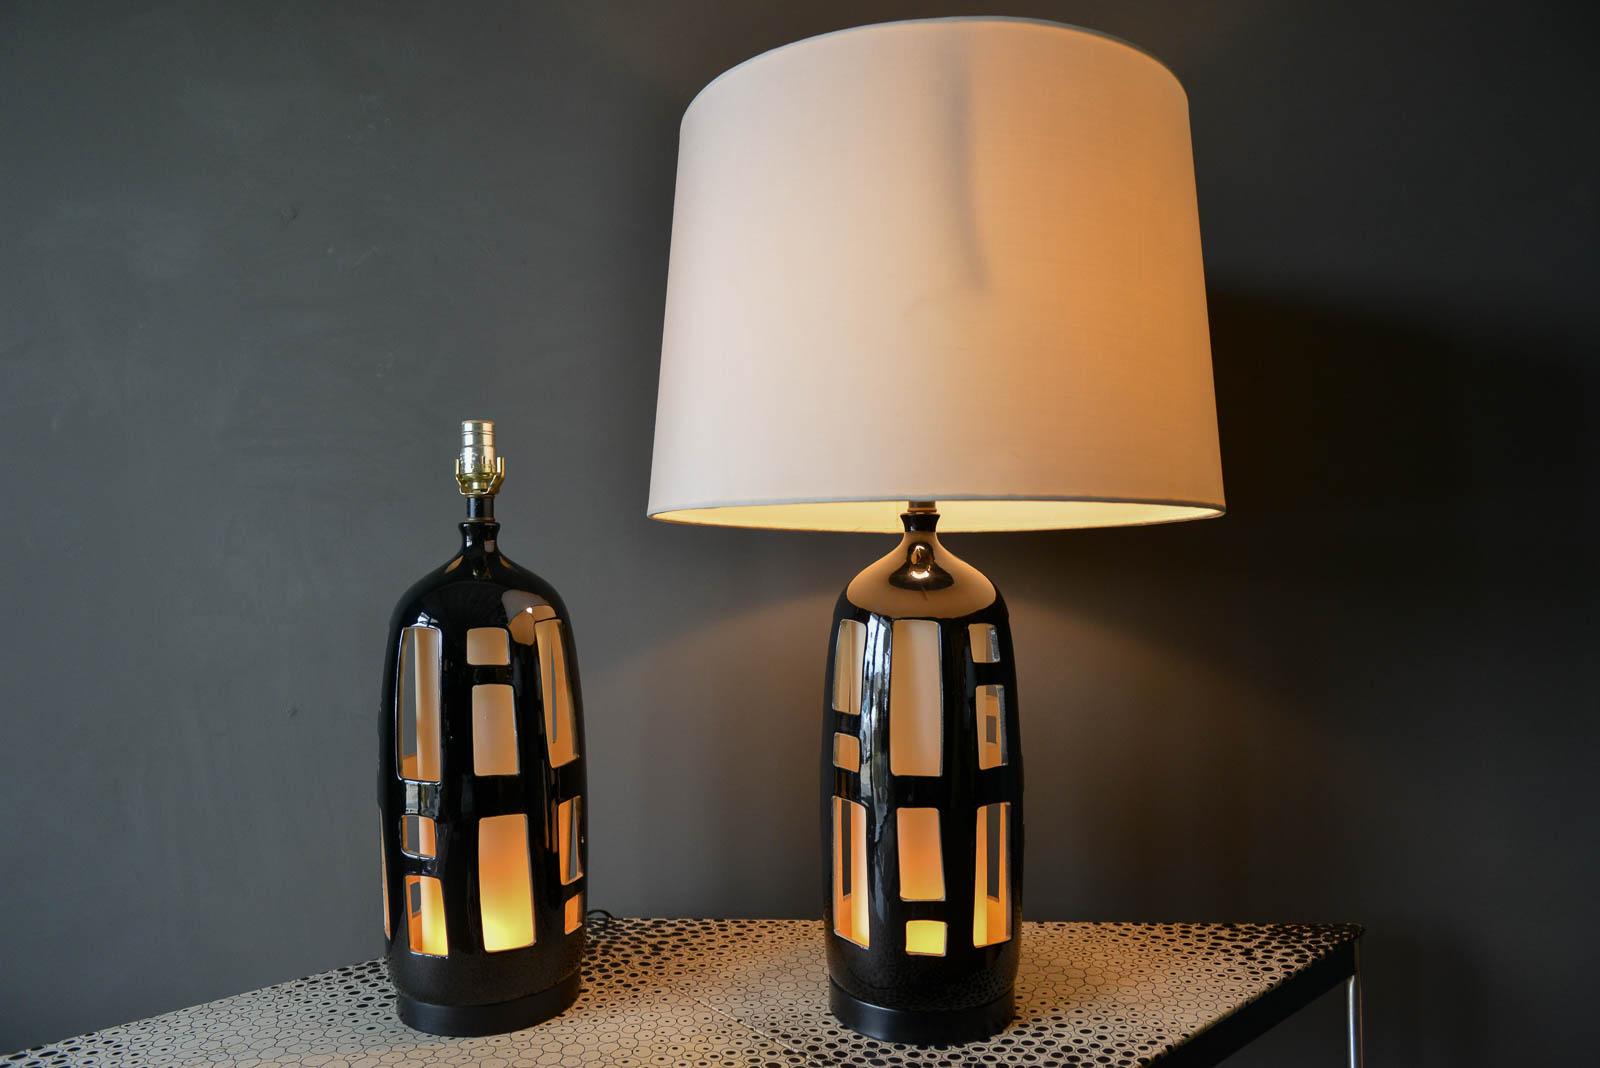 Pair of ceramic cutout lamps with dual illumination, circa 1970. Beautiful black and white design with independently controlled top and bottom switch to illuminate the column or neck separately. Excellent original condition. New wiring.

Measure: